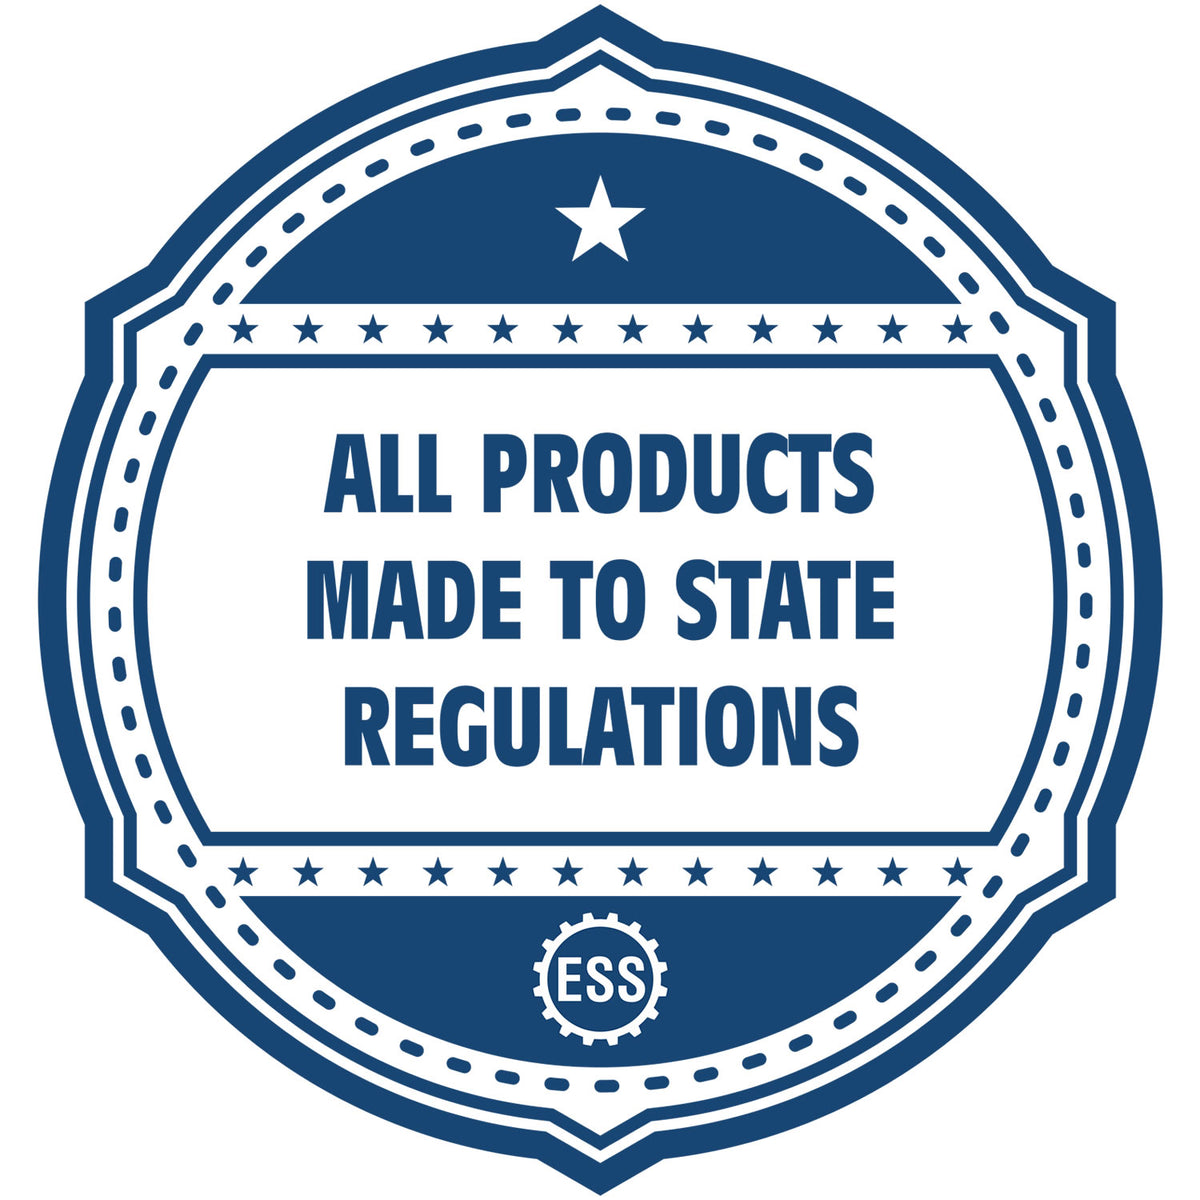 A blue icon or badge for the Slim Pre-Inked South Carolina Professional Geologist Seal Stamp showing that this product is made in compliance with state regulations.